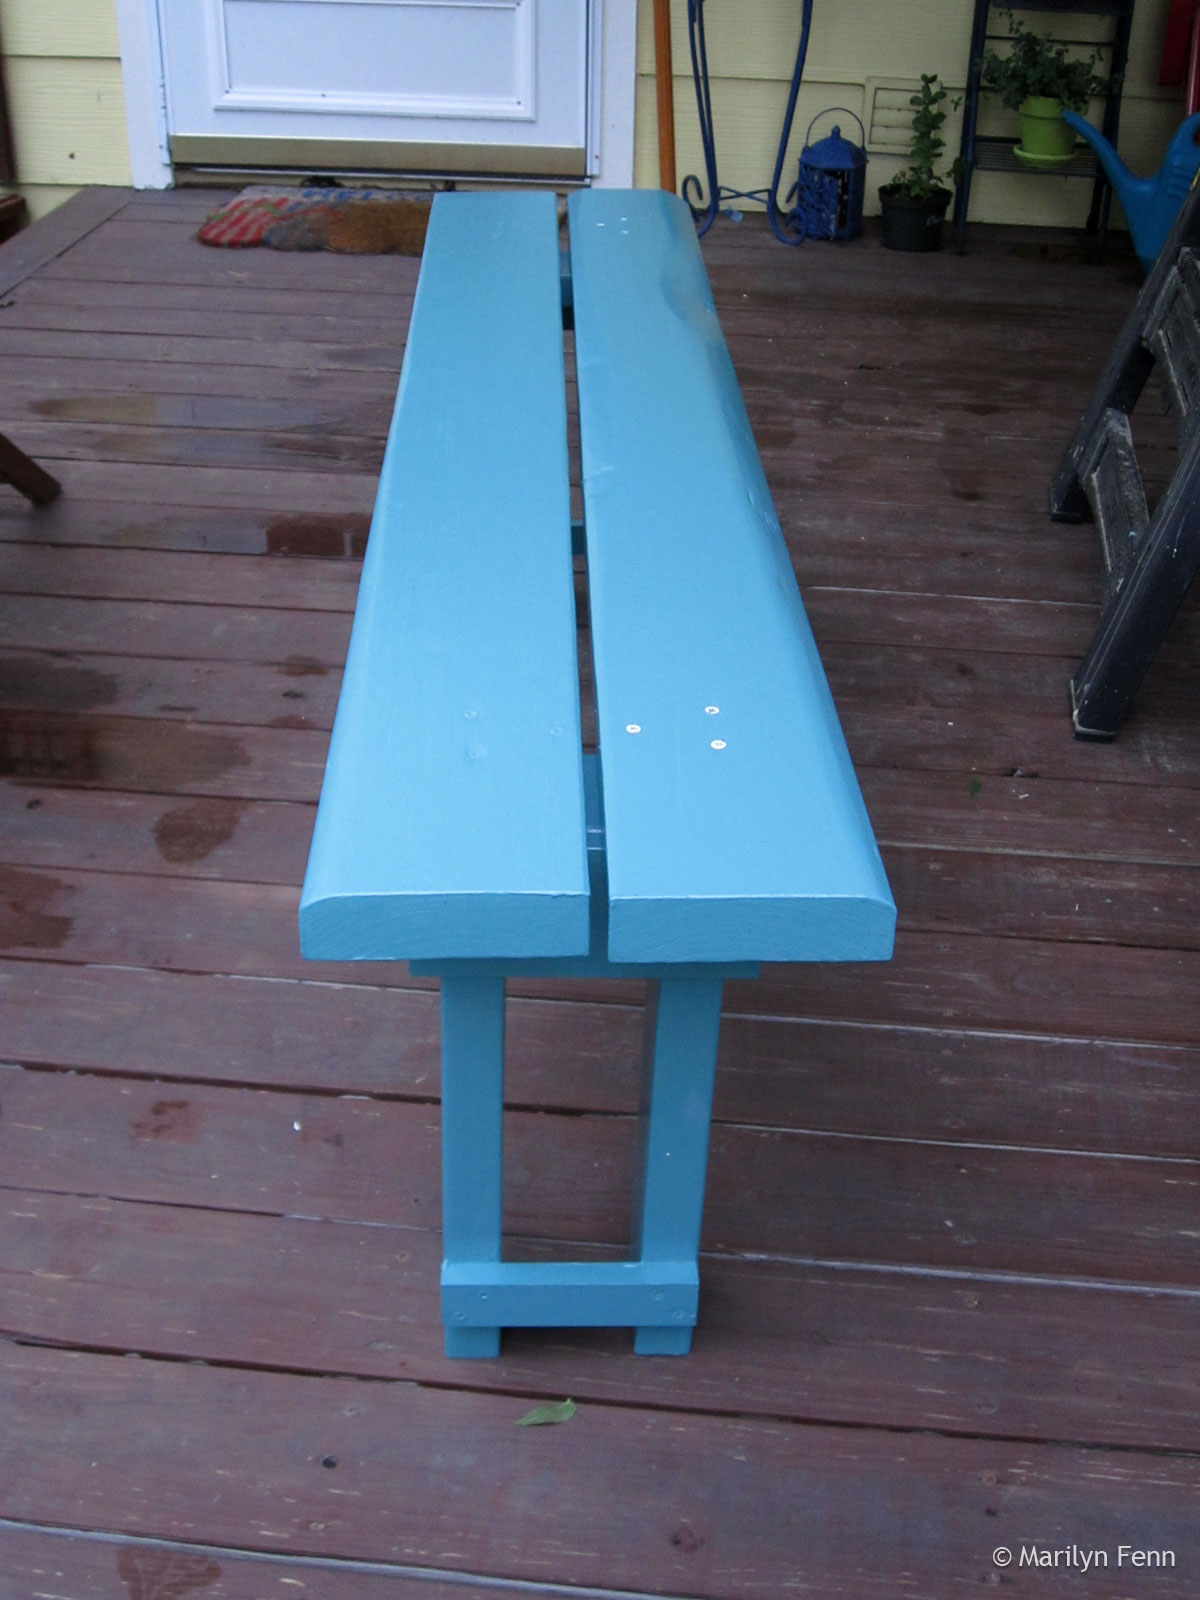 Narrow-stance garden bench, painted